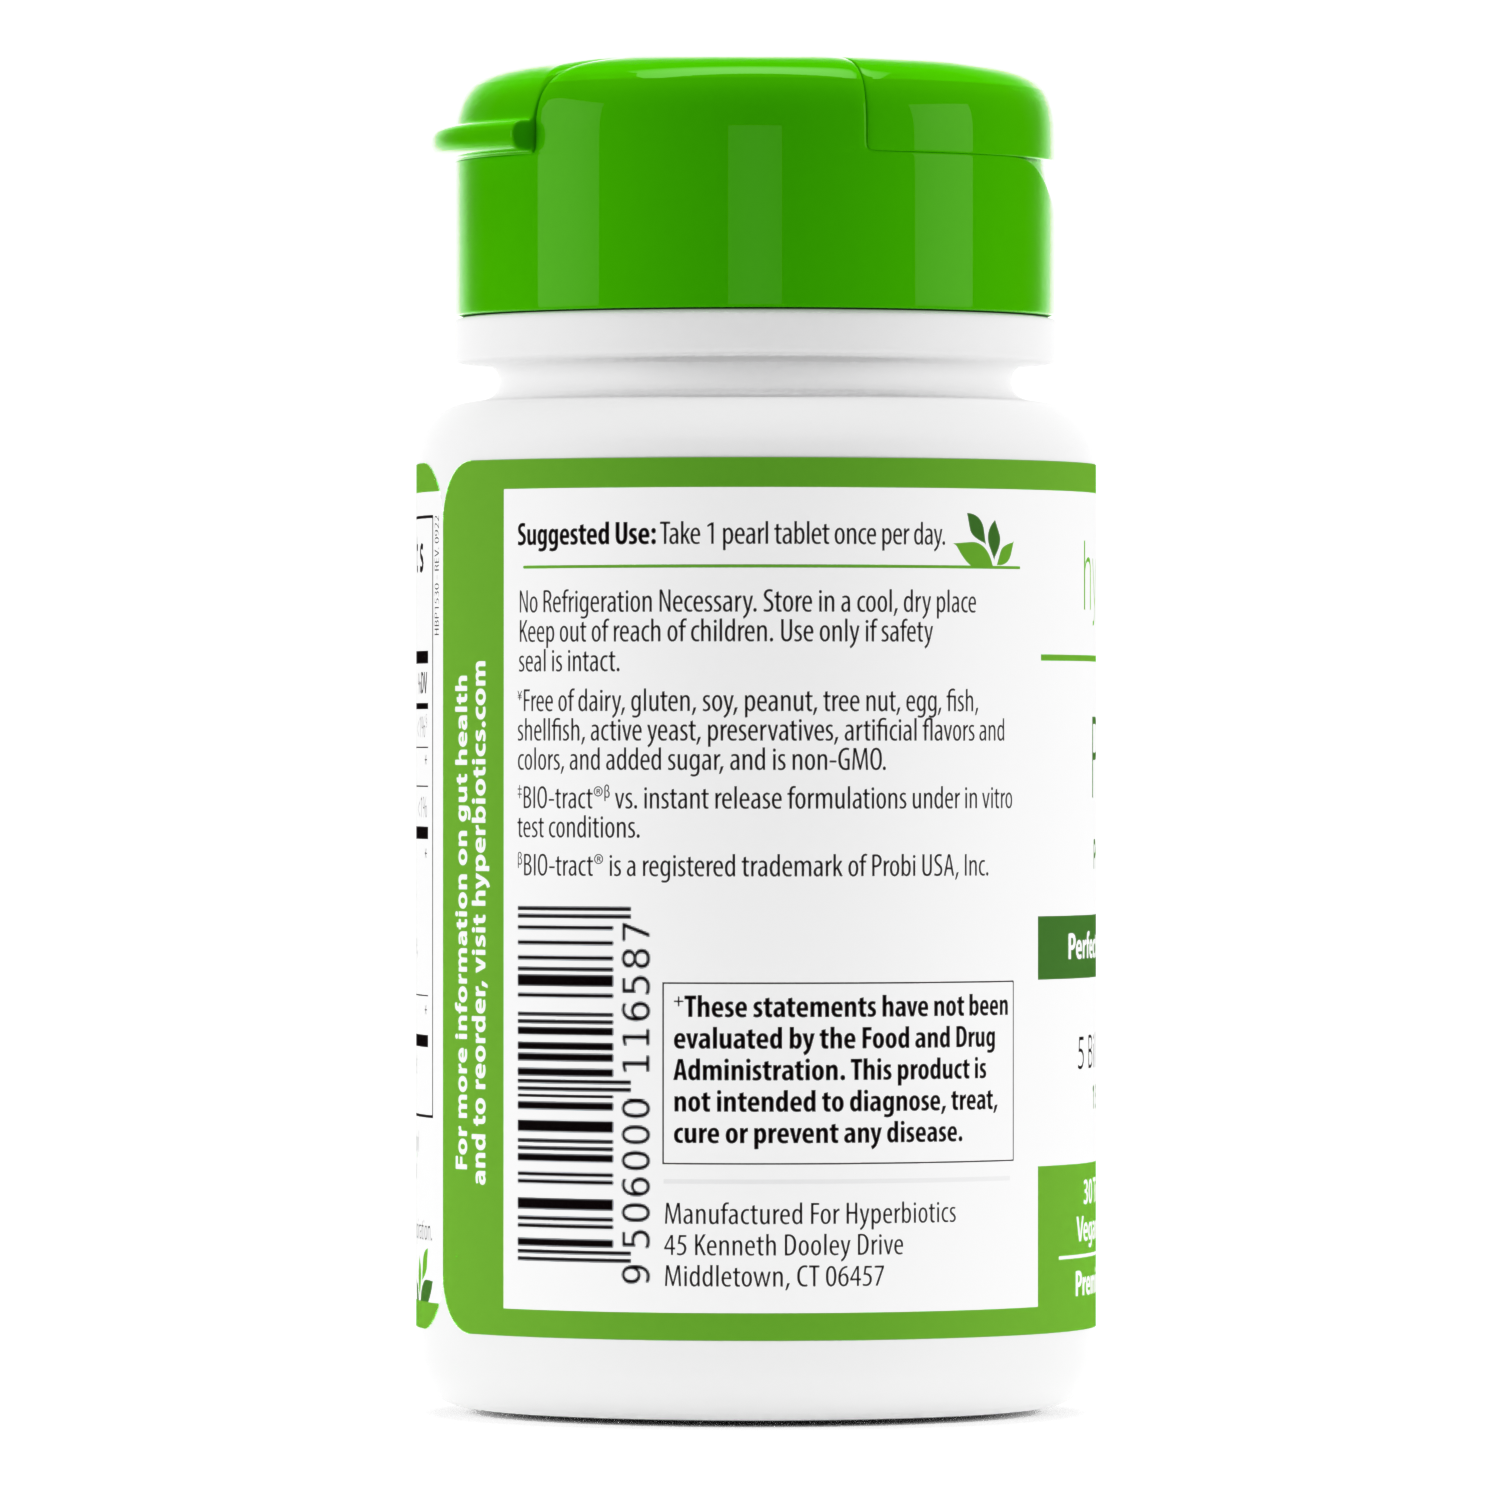 PRO-15: Perfect for Everyday Gut Support* - Hyperbiotics